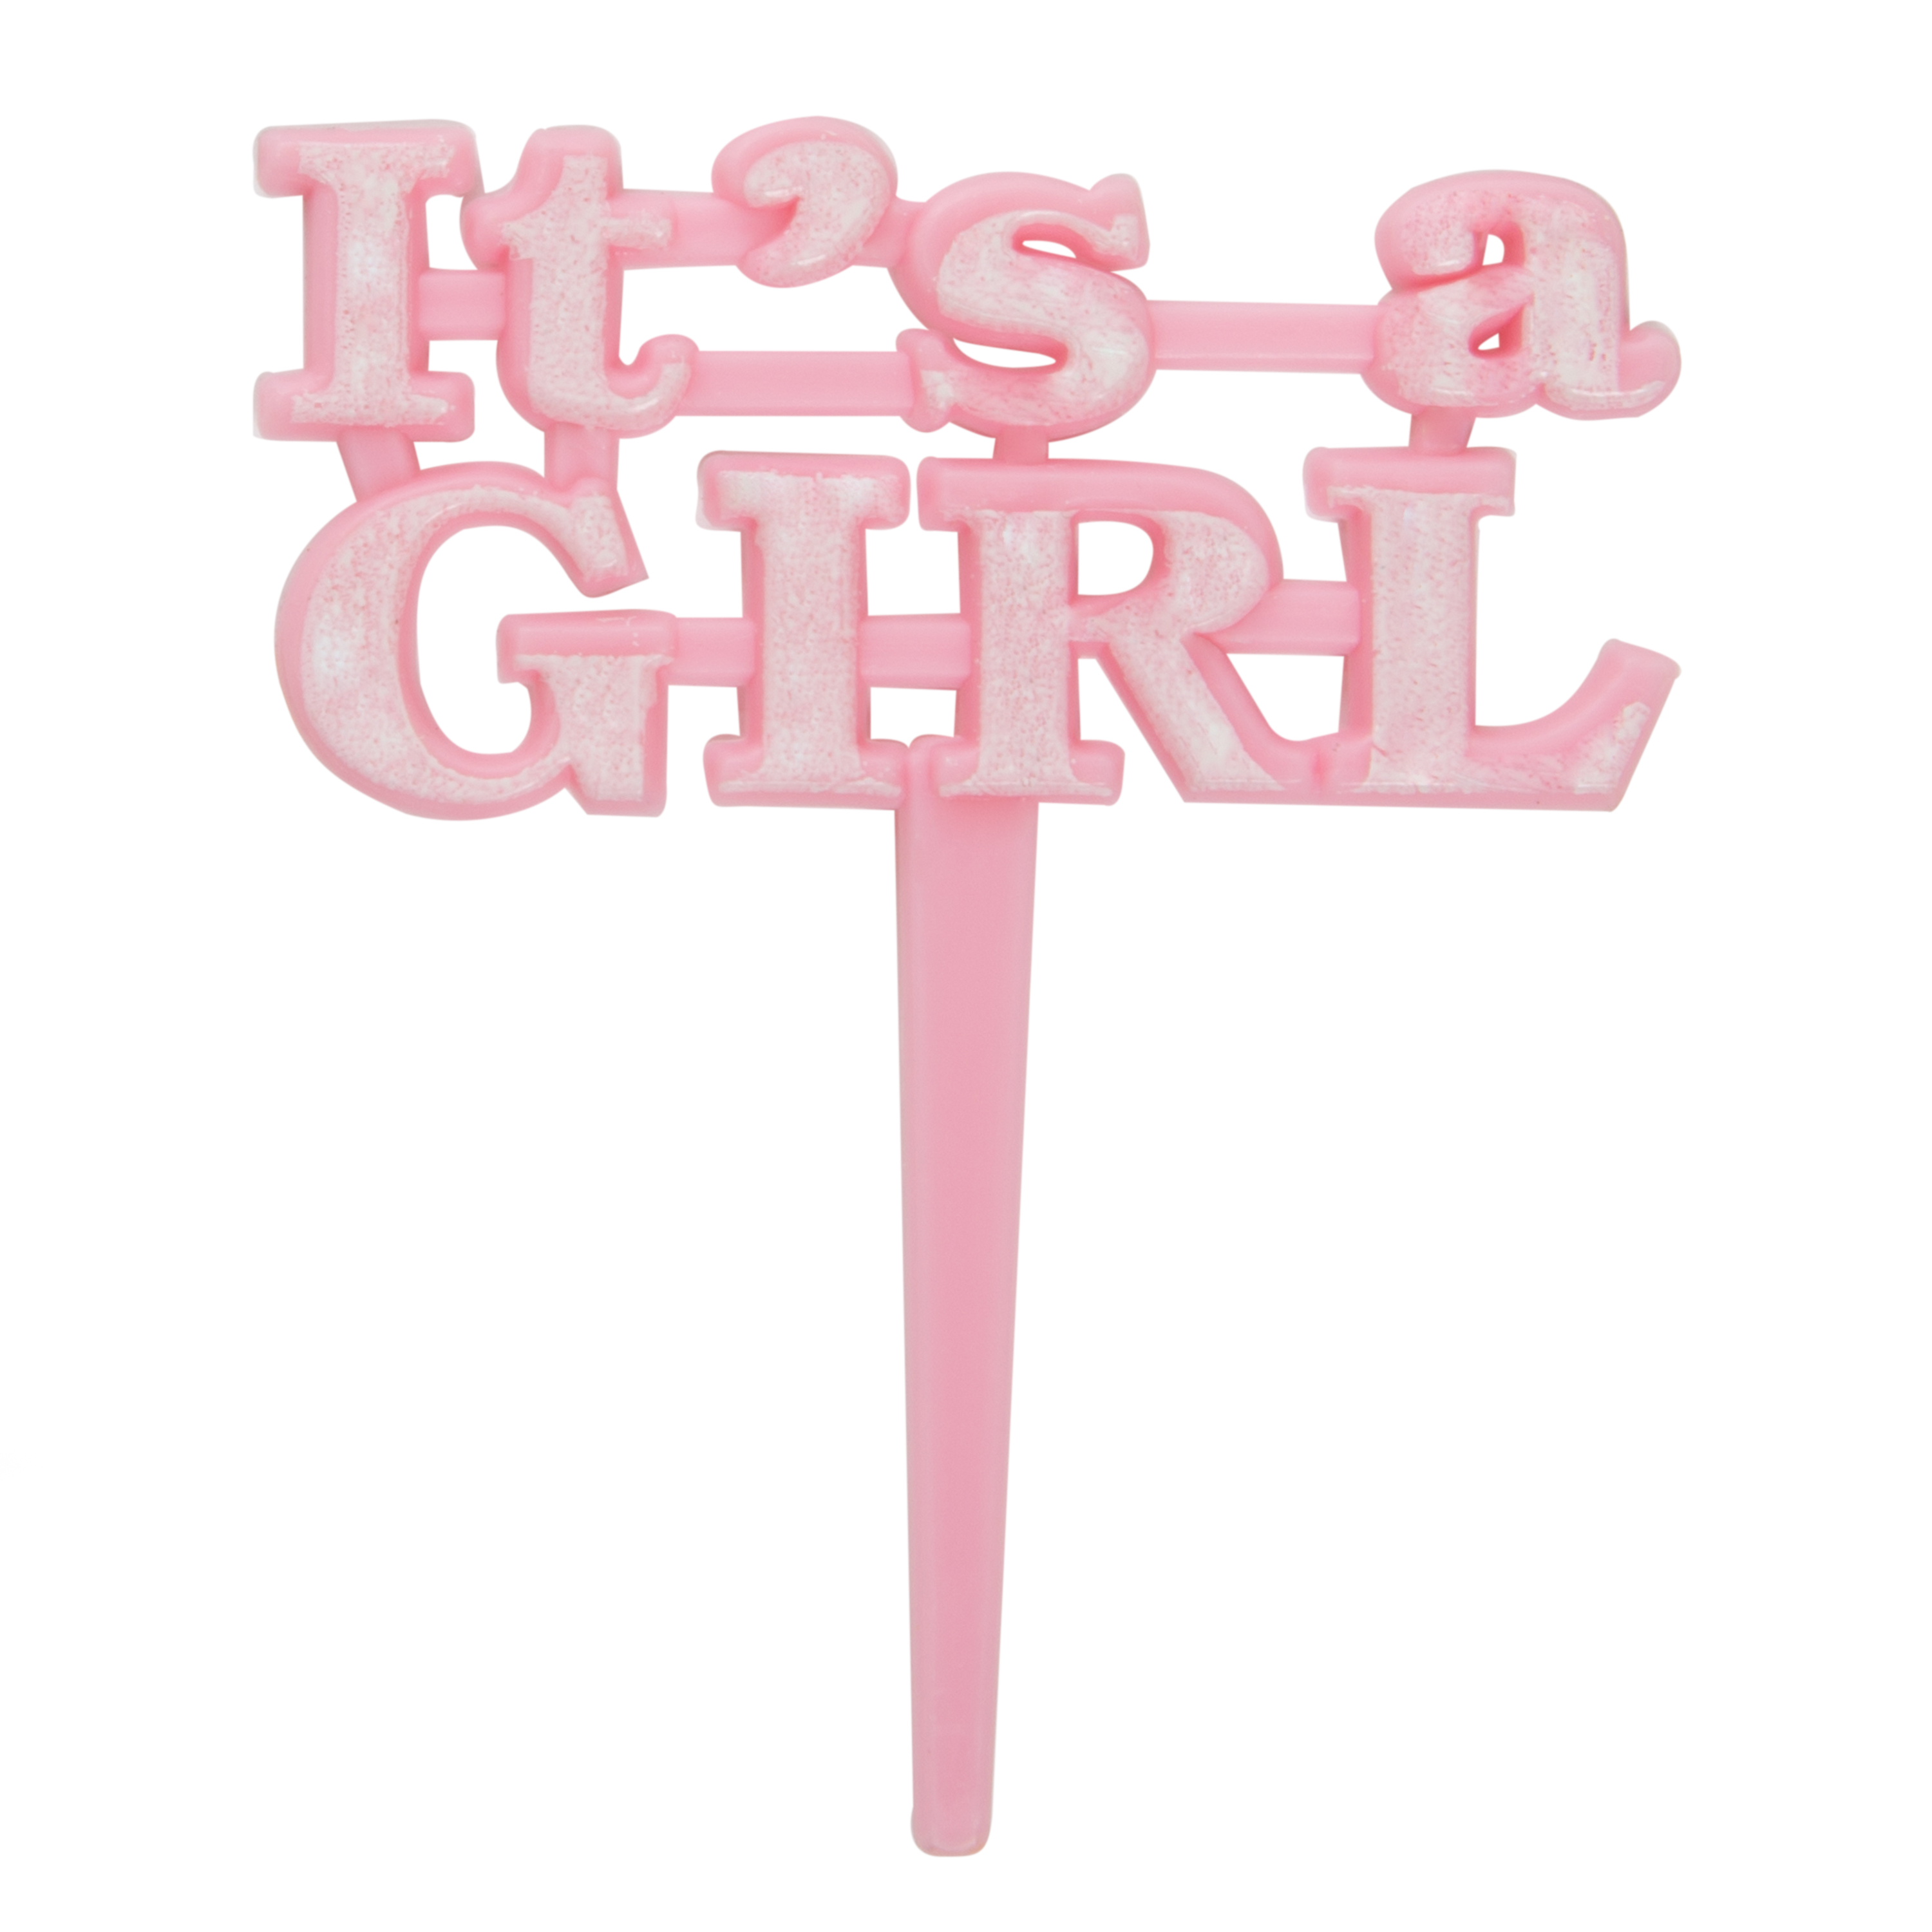 Baby Shower Decorations It/'s a Girl. Baby Shower Cupcake Toppers Baby Onesies Baby Girl Cupcake Toppers